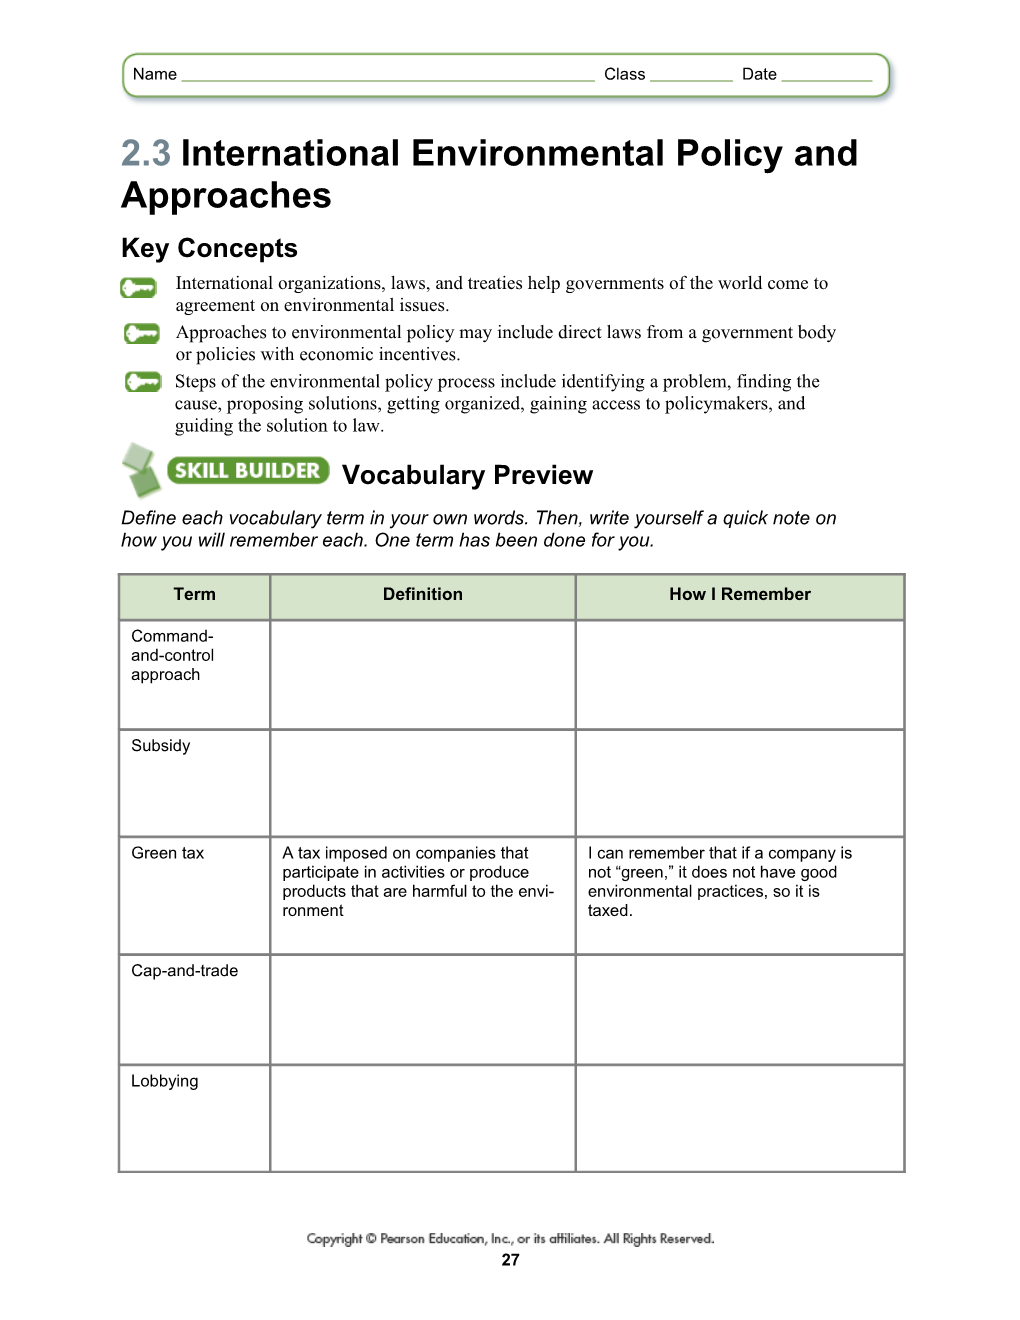 2.3International Environmental Policy and Approaches